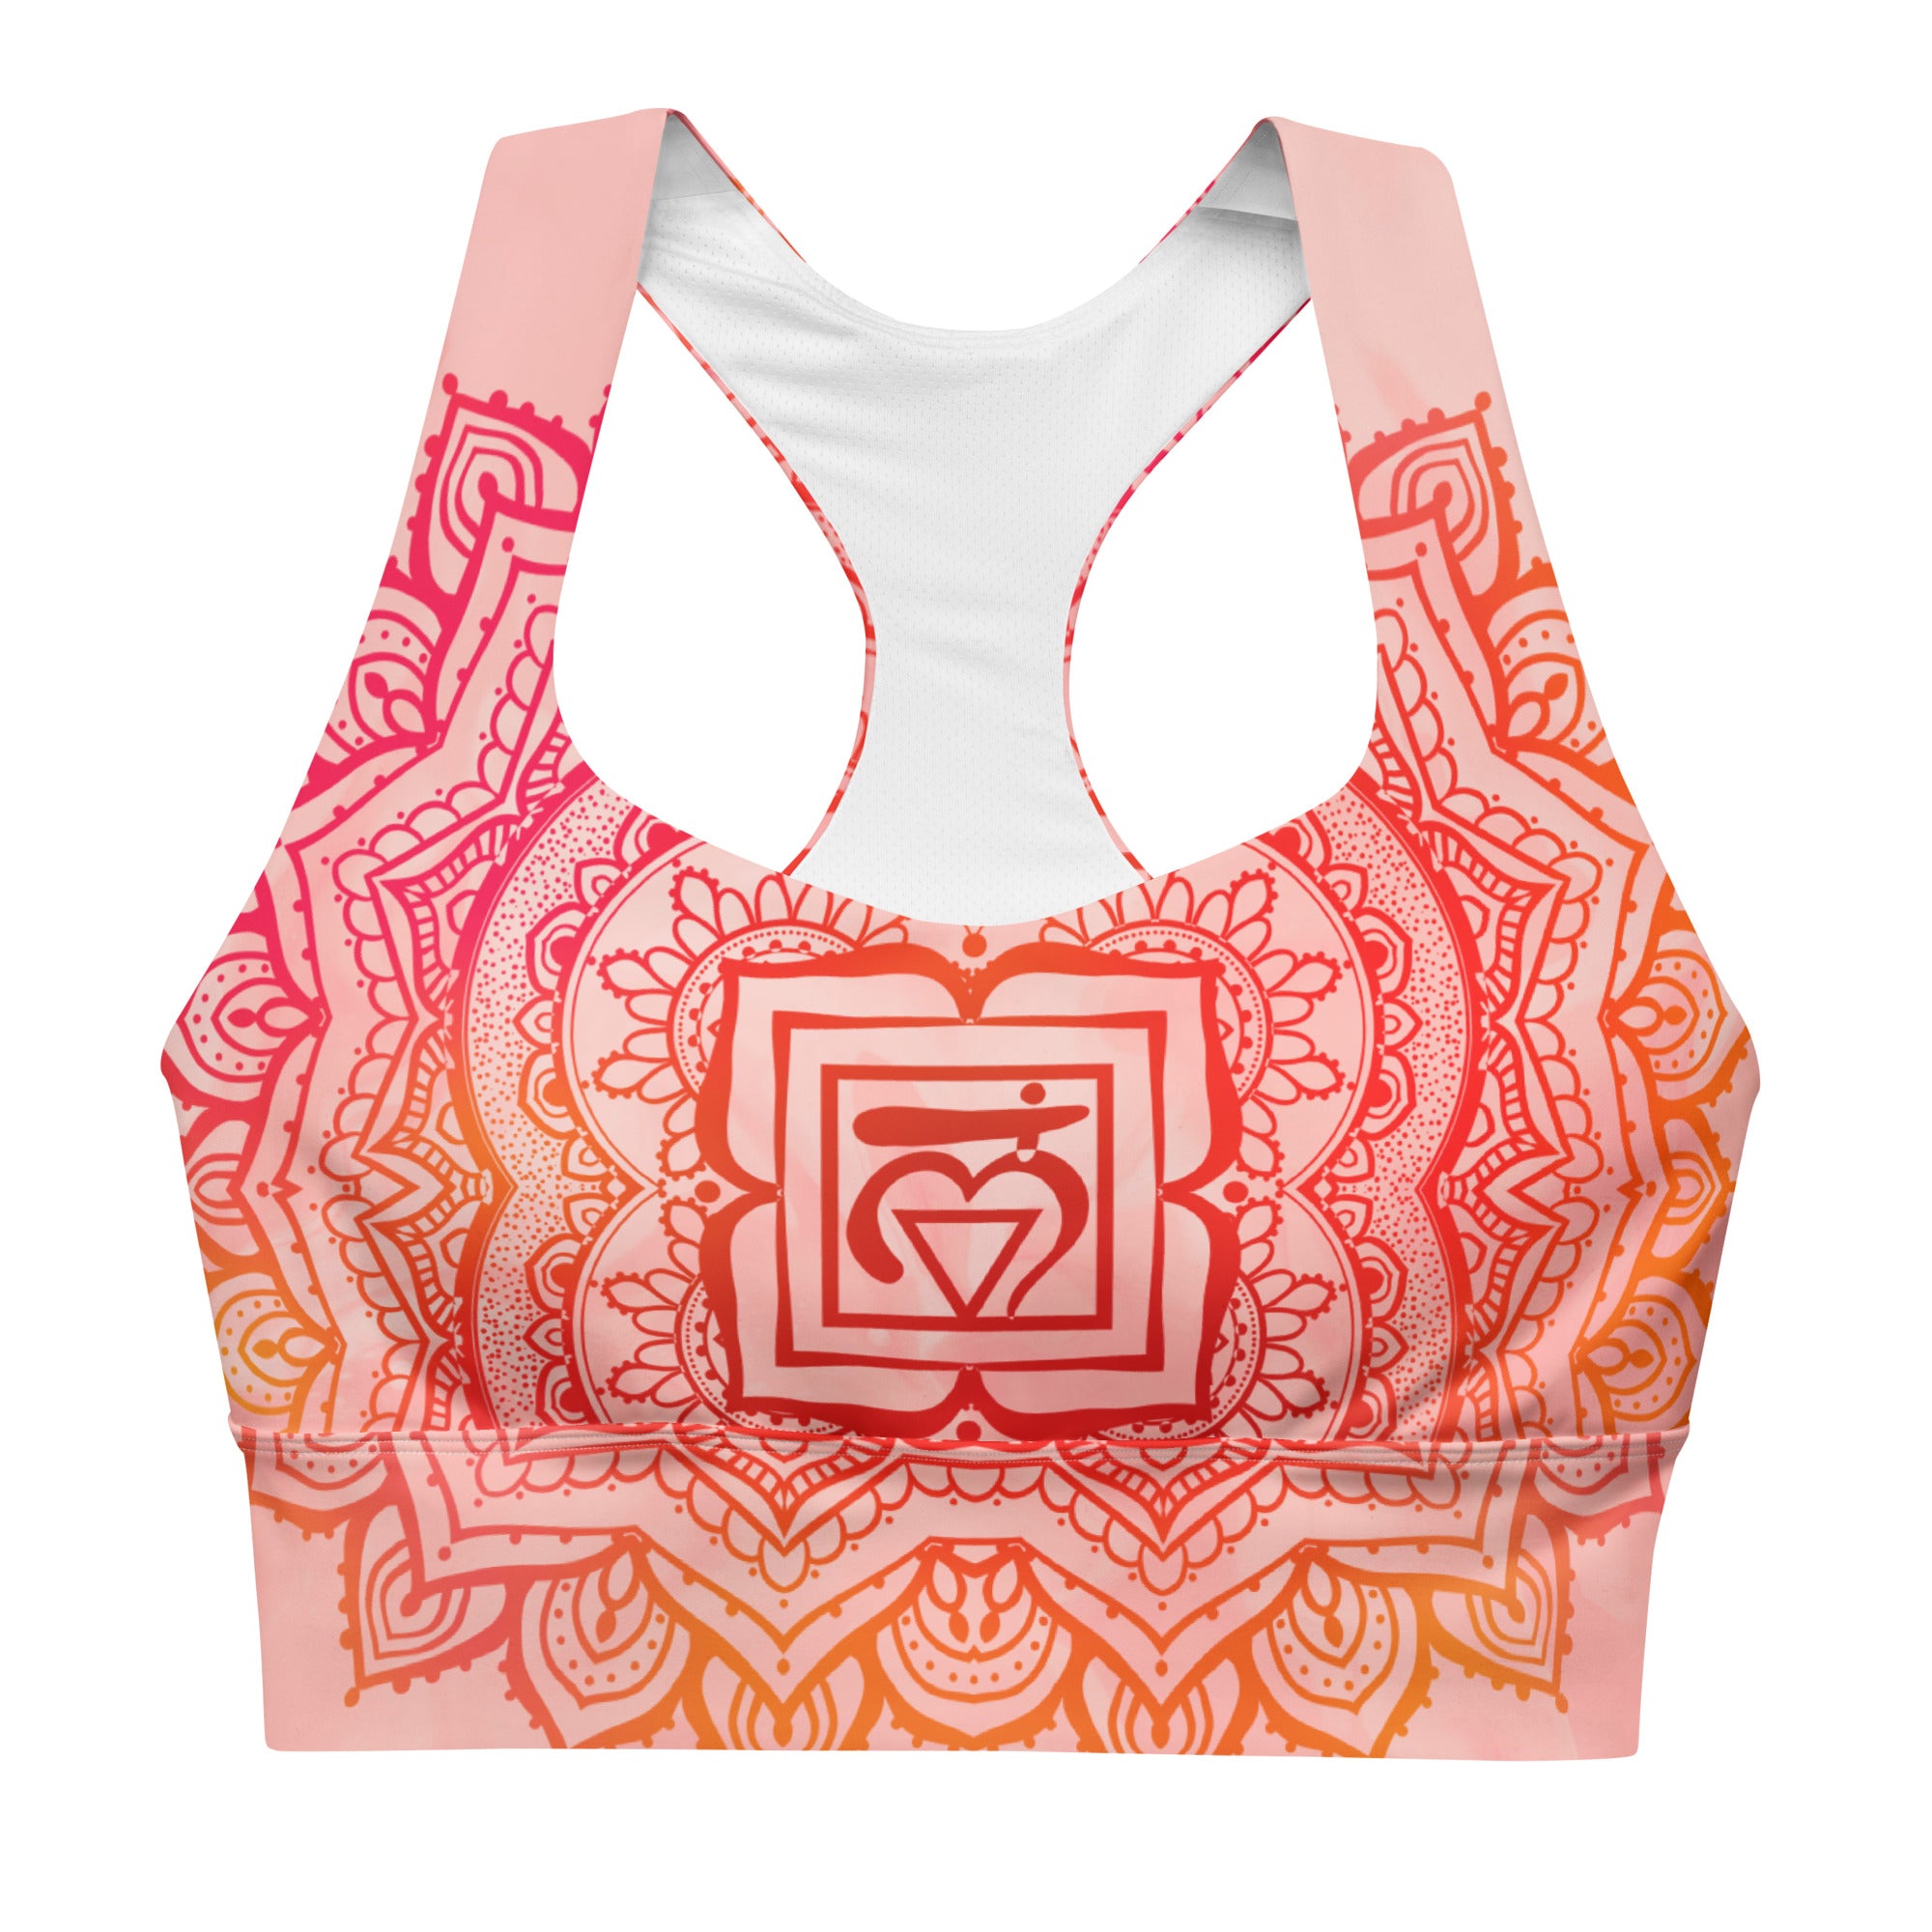 longline sports bra by goddess swag. the design has a pink orange background with an overlay of a root chakra mandala design in red and orange. this design is on front and back of sports bra.